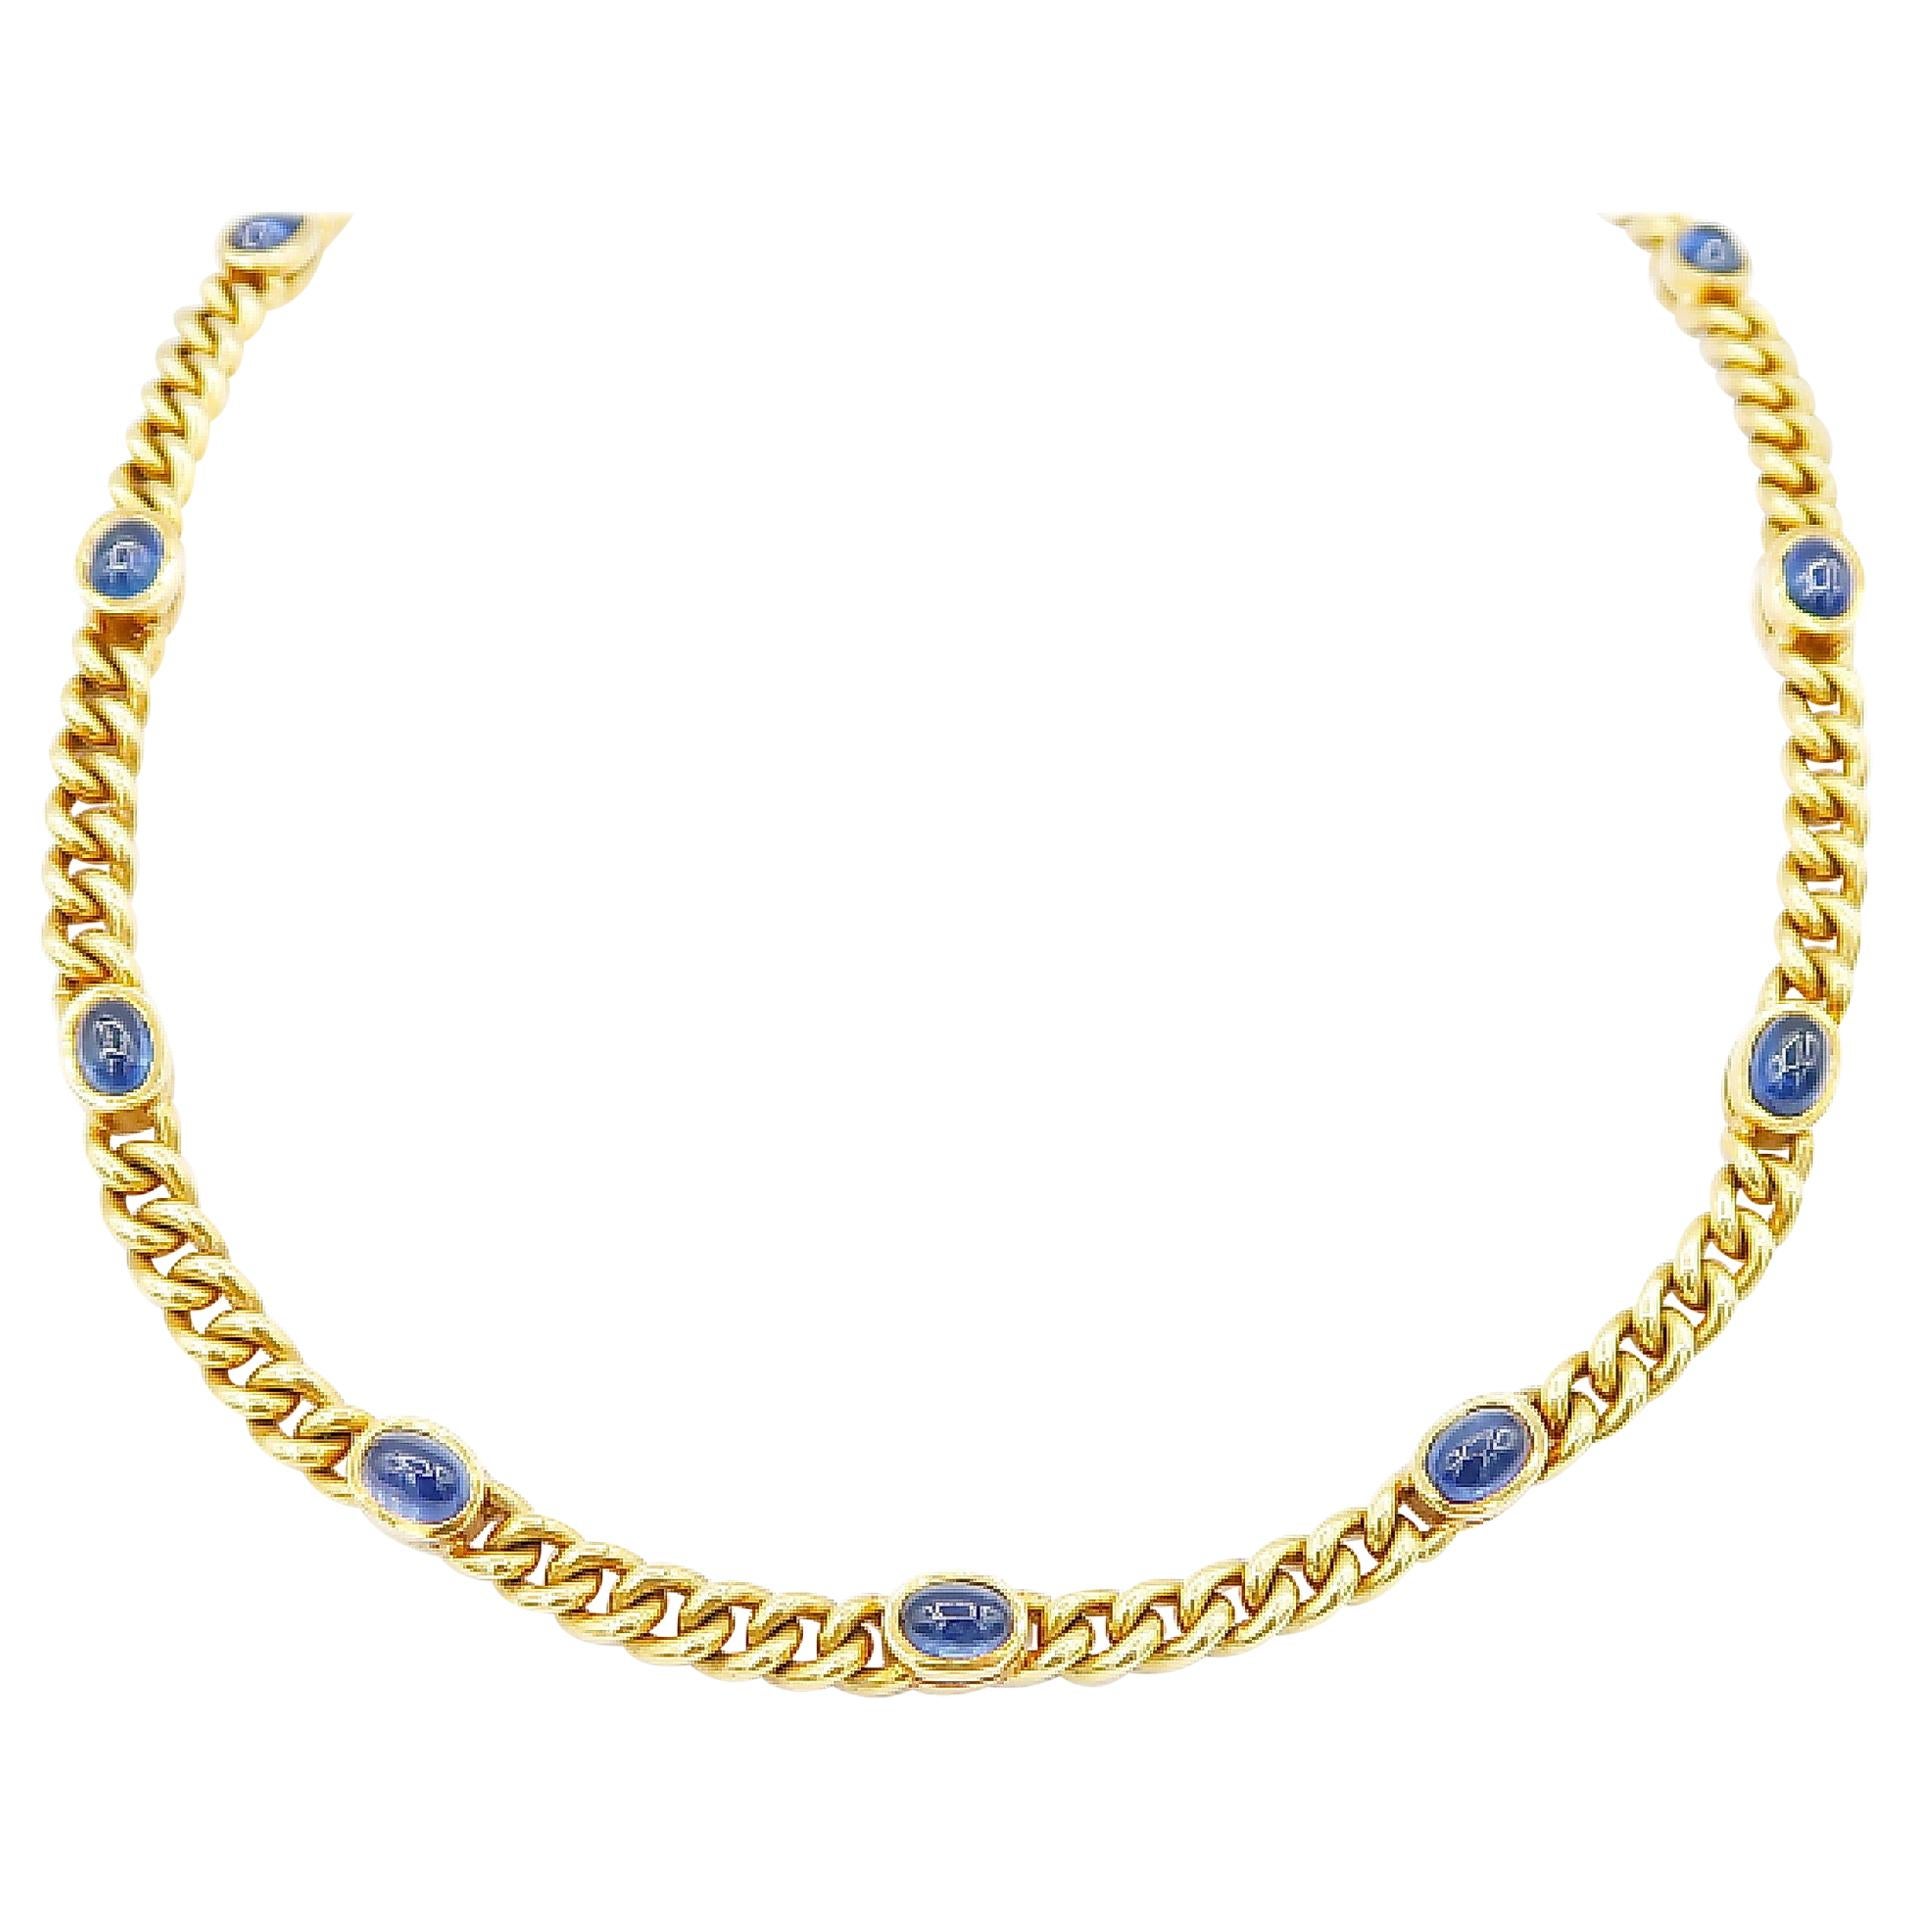 18 Karat Gold Twisted Curb Chain Necklace with Bezel-Set Oval Cabochon Sapphires For Sale